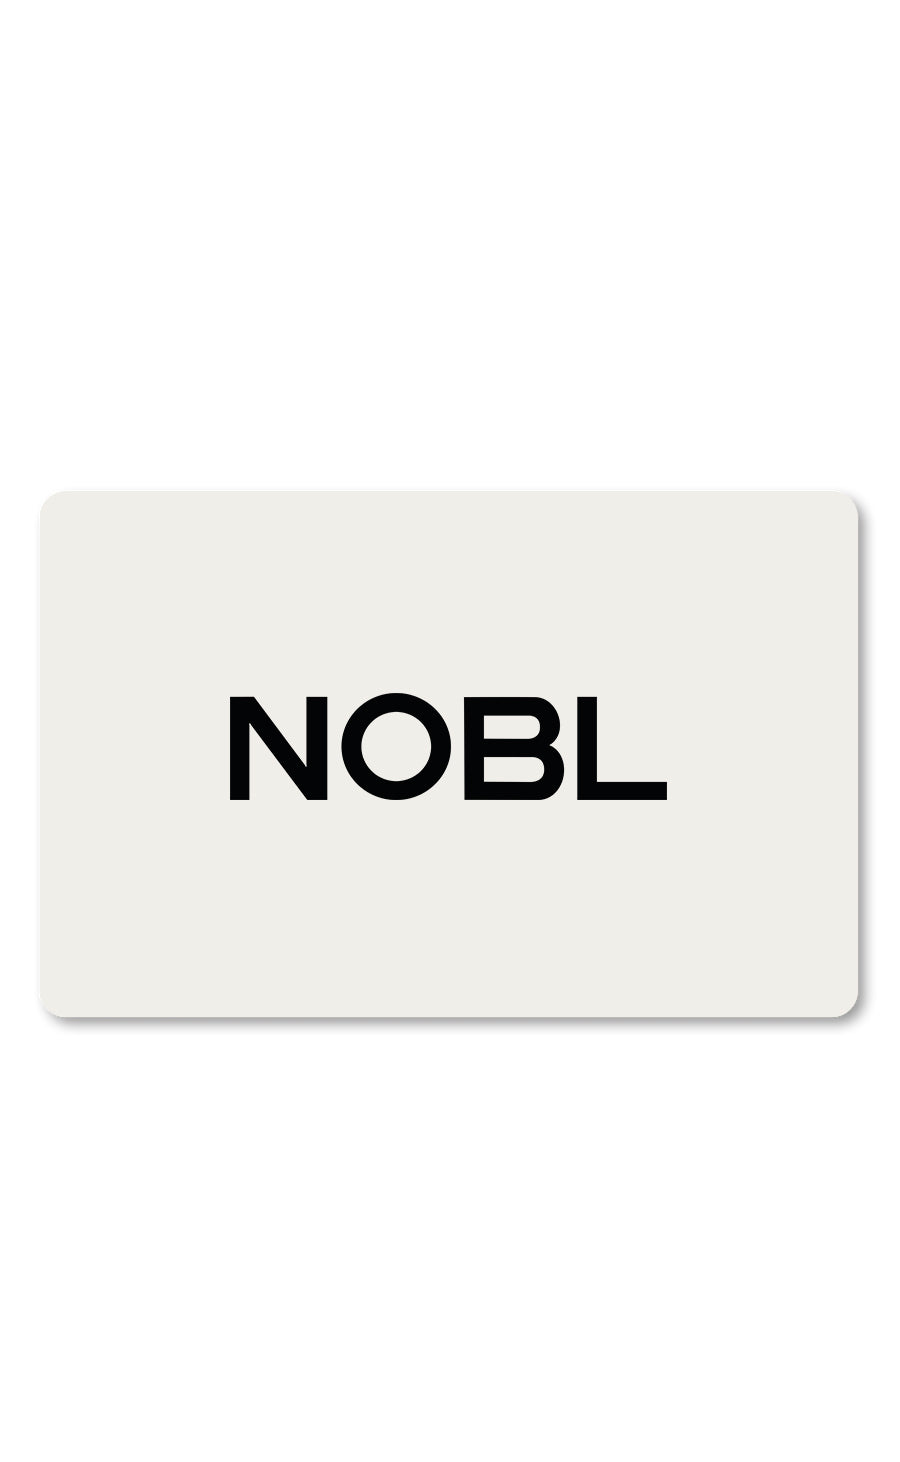 Nobl Gift Card